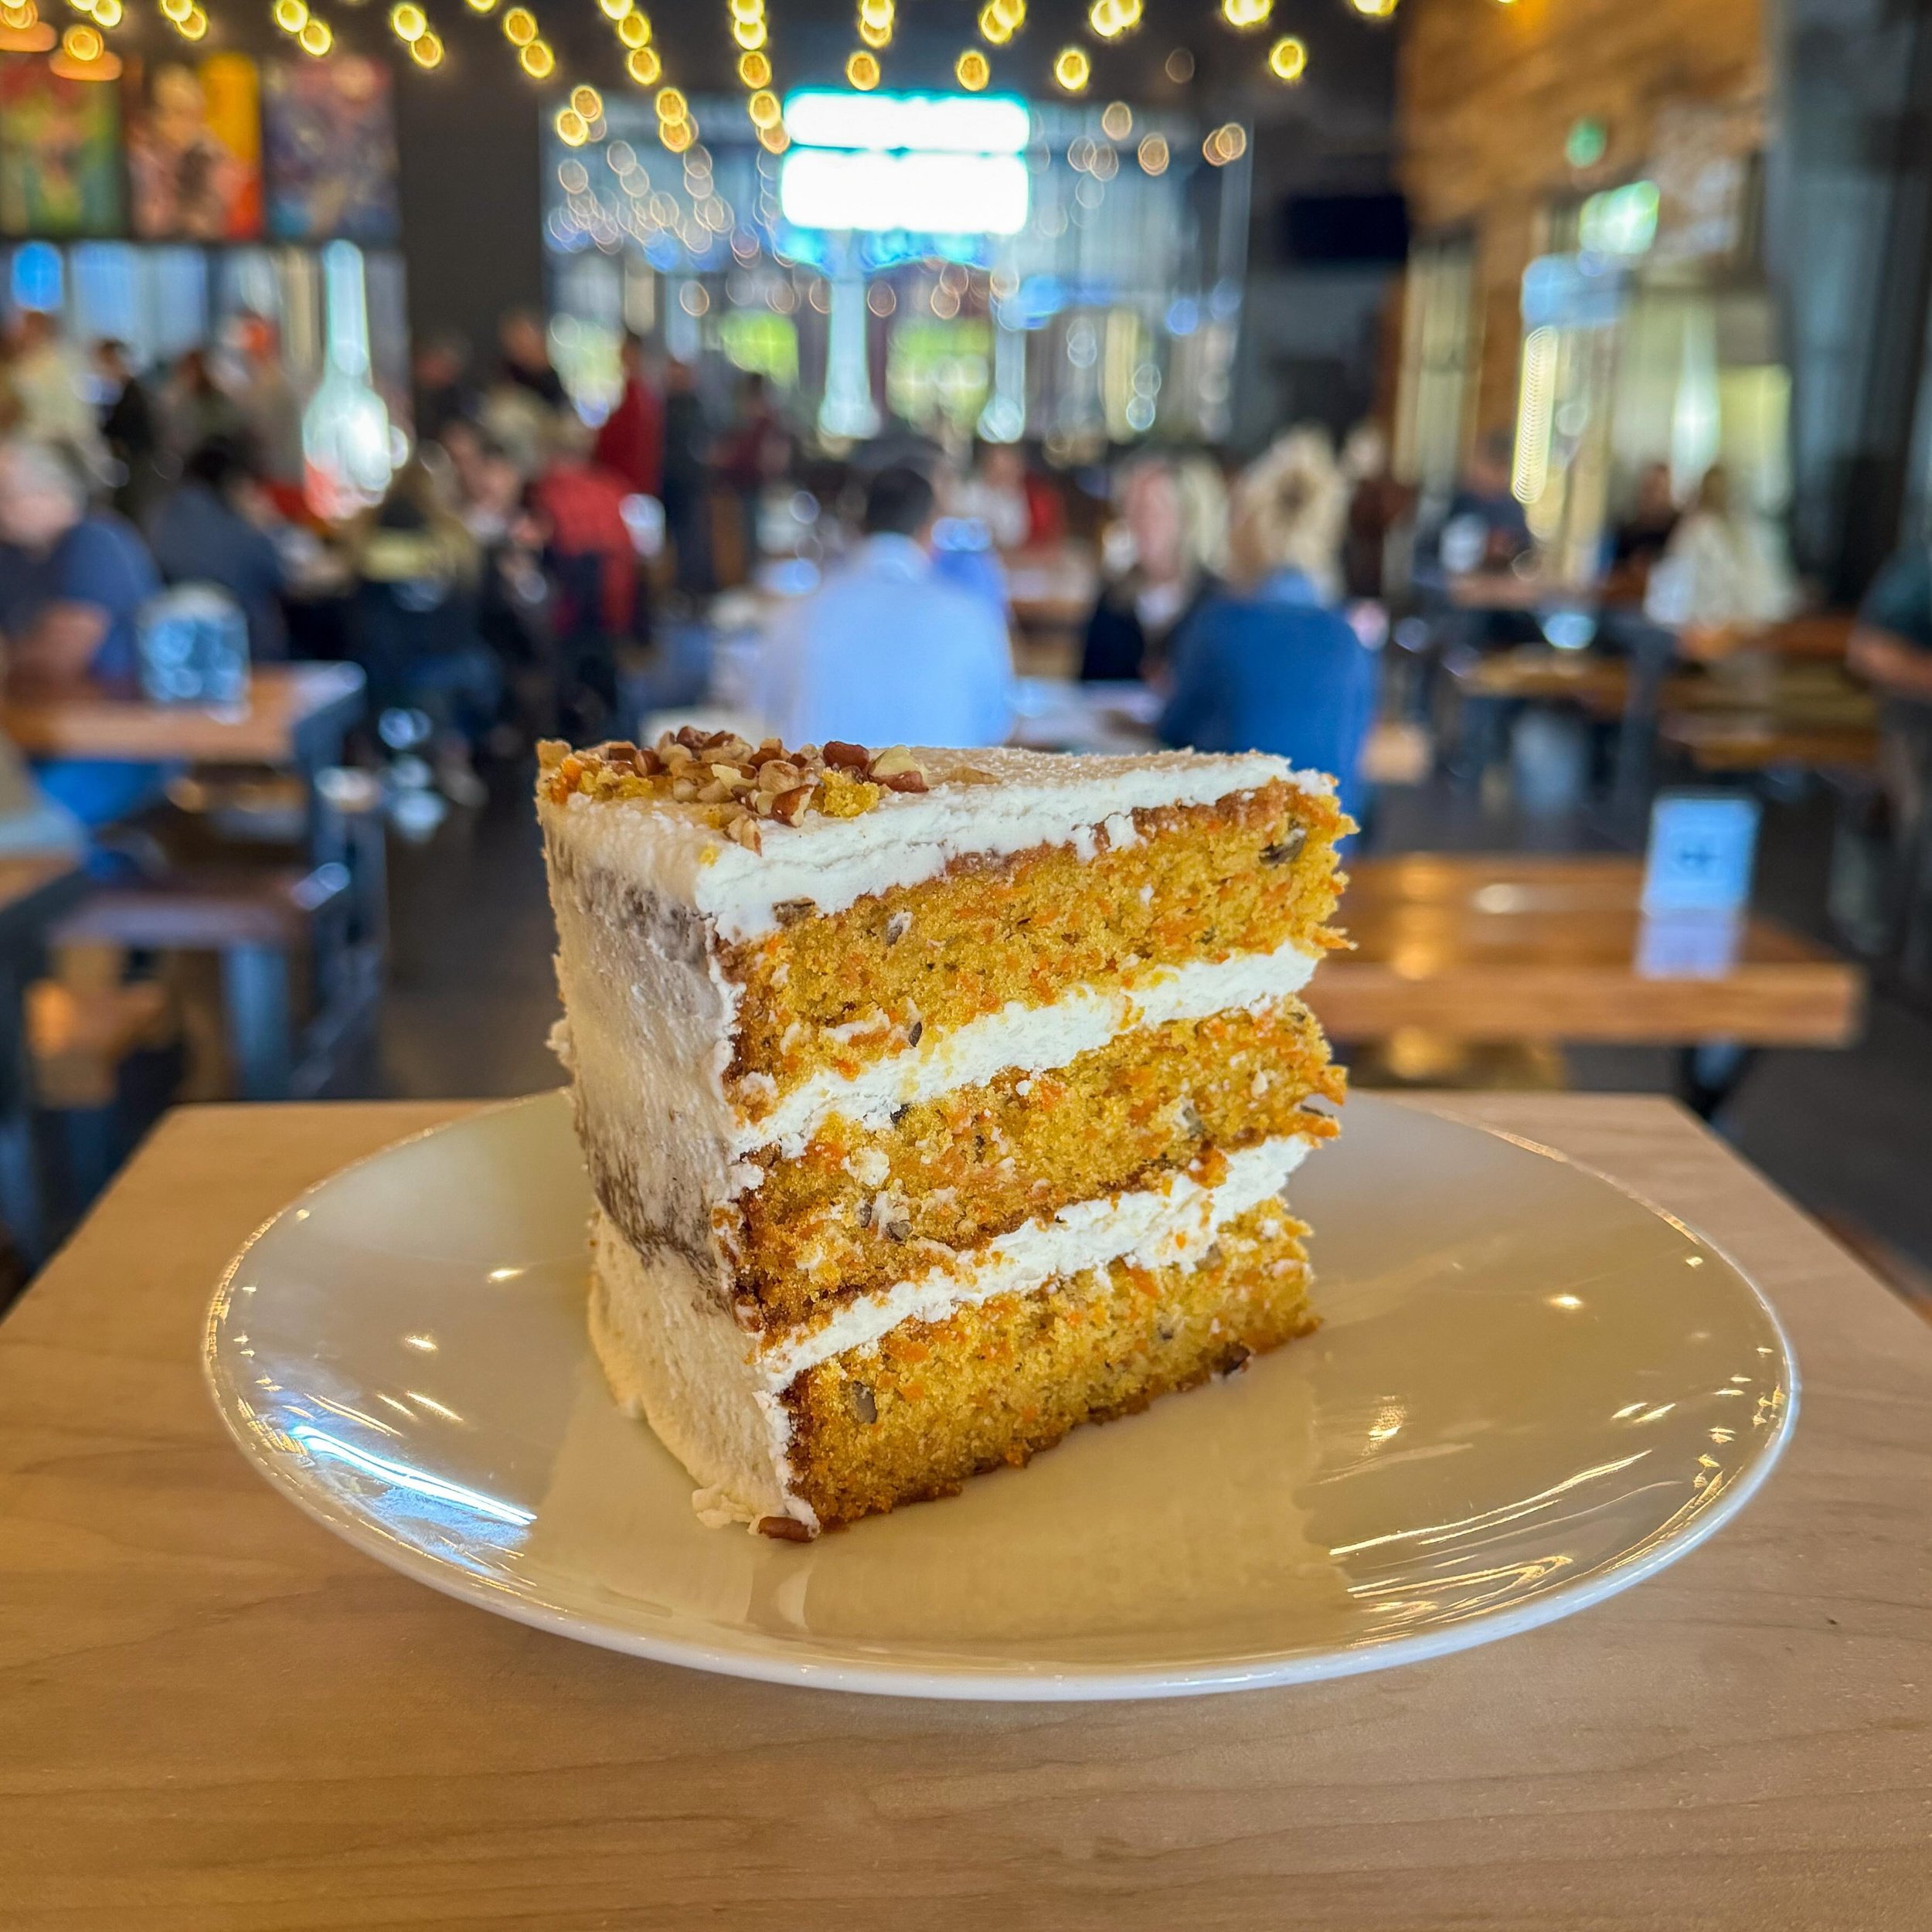 CARROT CAKE

Delicious carrot cake layered with browned butter cream cheese frosting. 

Pair with Wolf Pack. 

Available now and all month long. Full food and drink menus available on our website. 

#tsggastropub #tsgbeercompany #yeahthatgreenville #